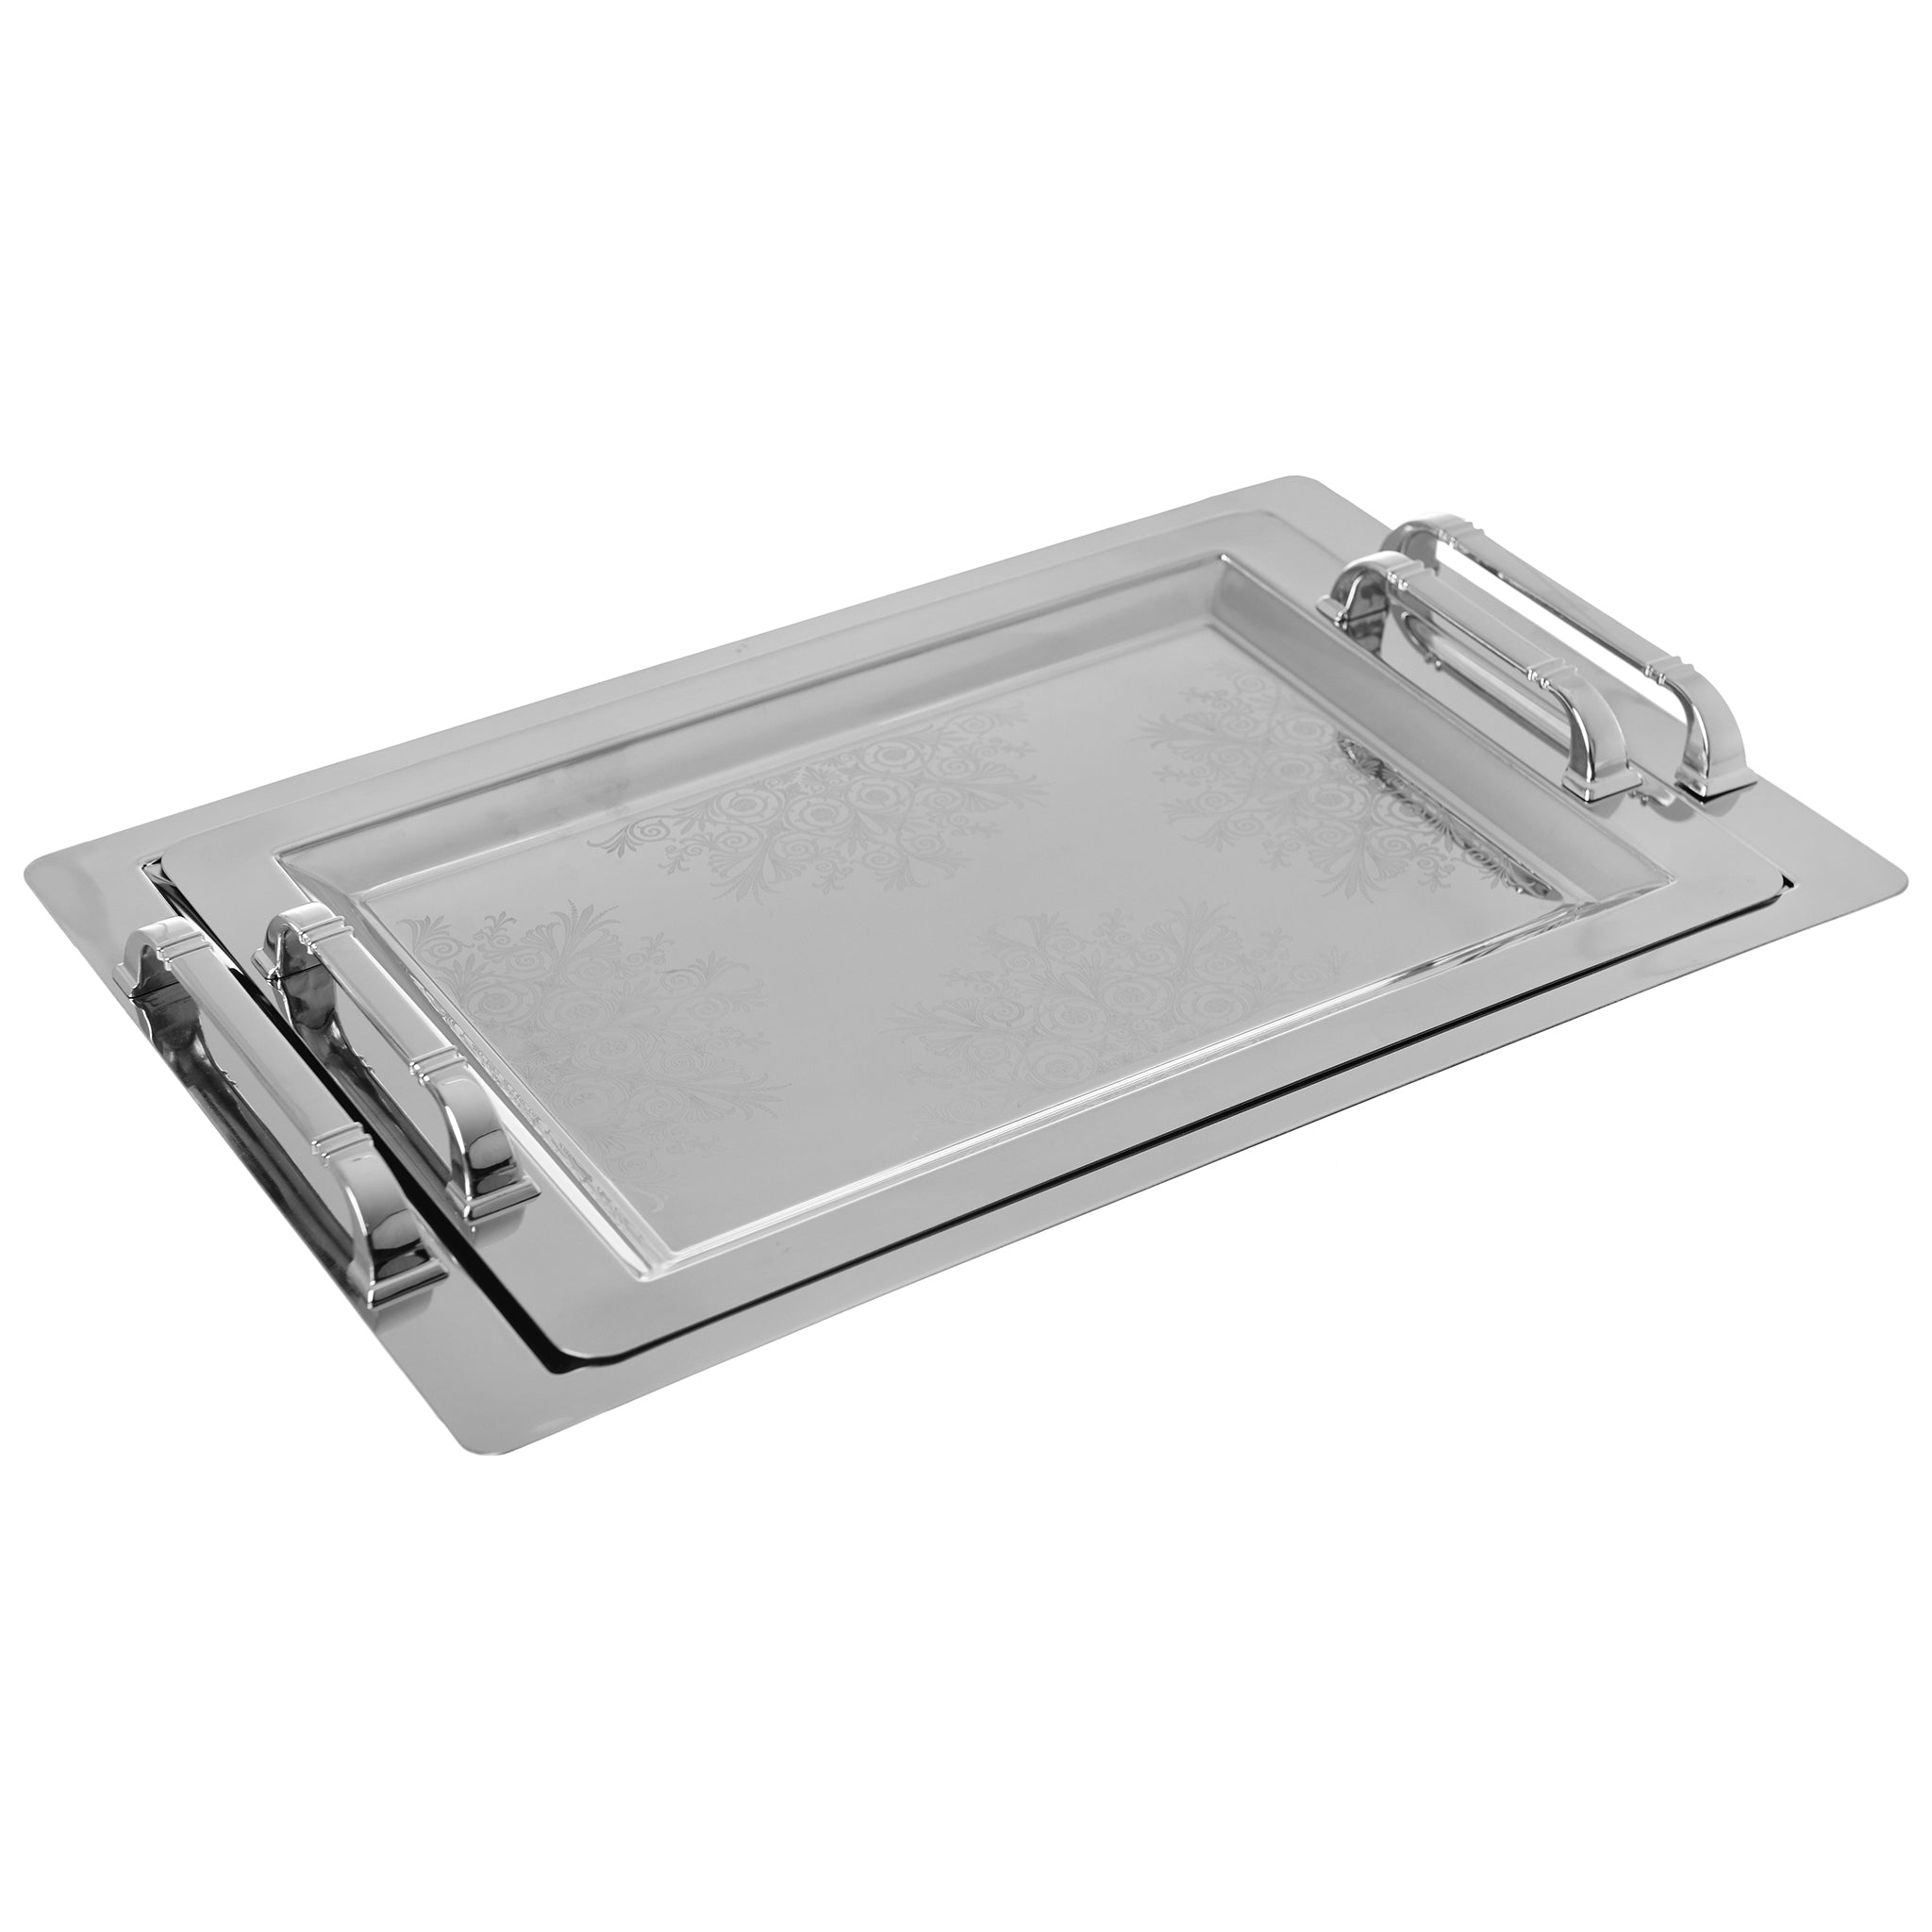 Goldon - Rectangular Tray Set With Handles 2 Pieces - Stainless Steel - 80001534